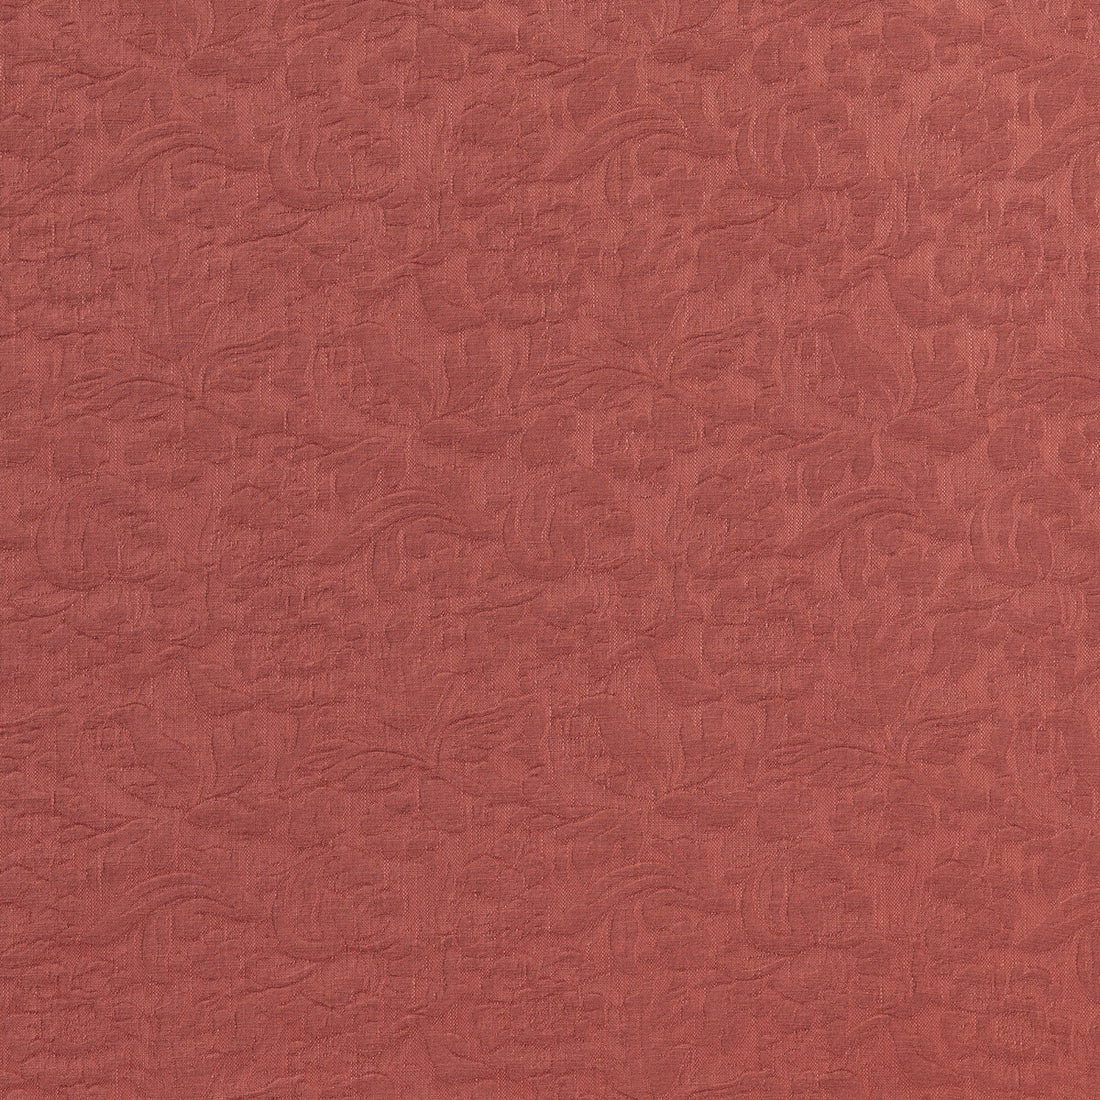 Gambetta Weave fabric in rose color - pattern 8019120.197.0 - by Brunschwig &amp; Fils in the Alsace Weaves collection